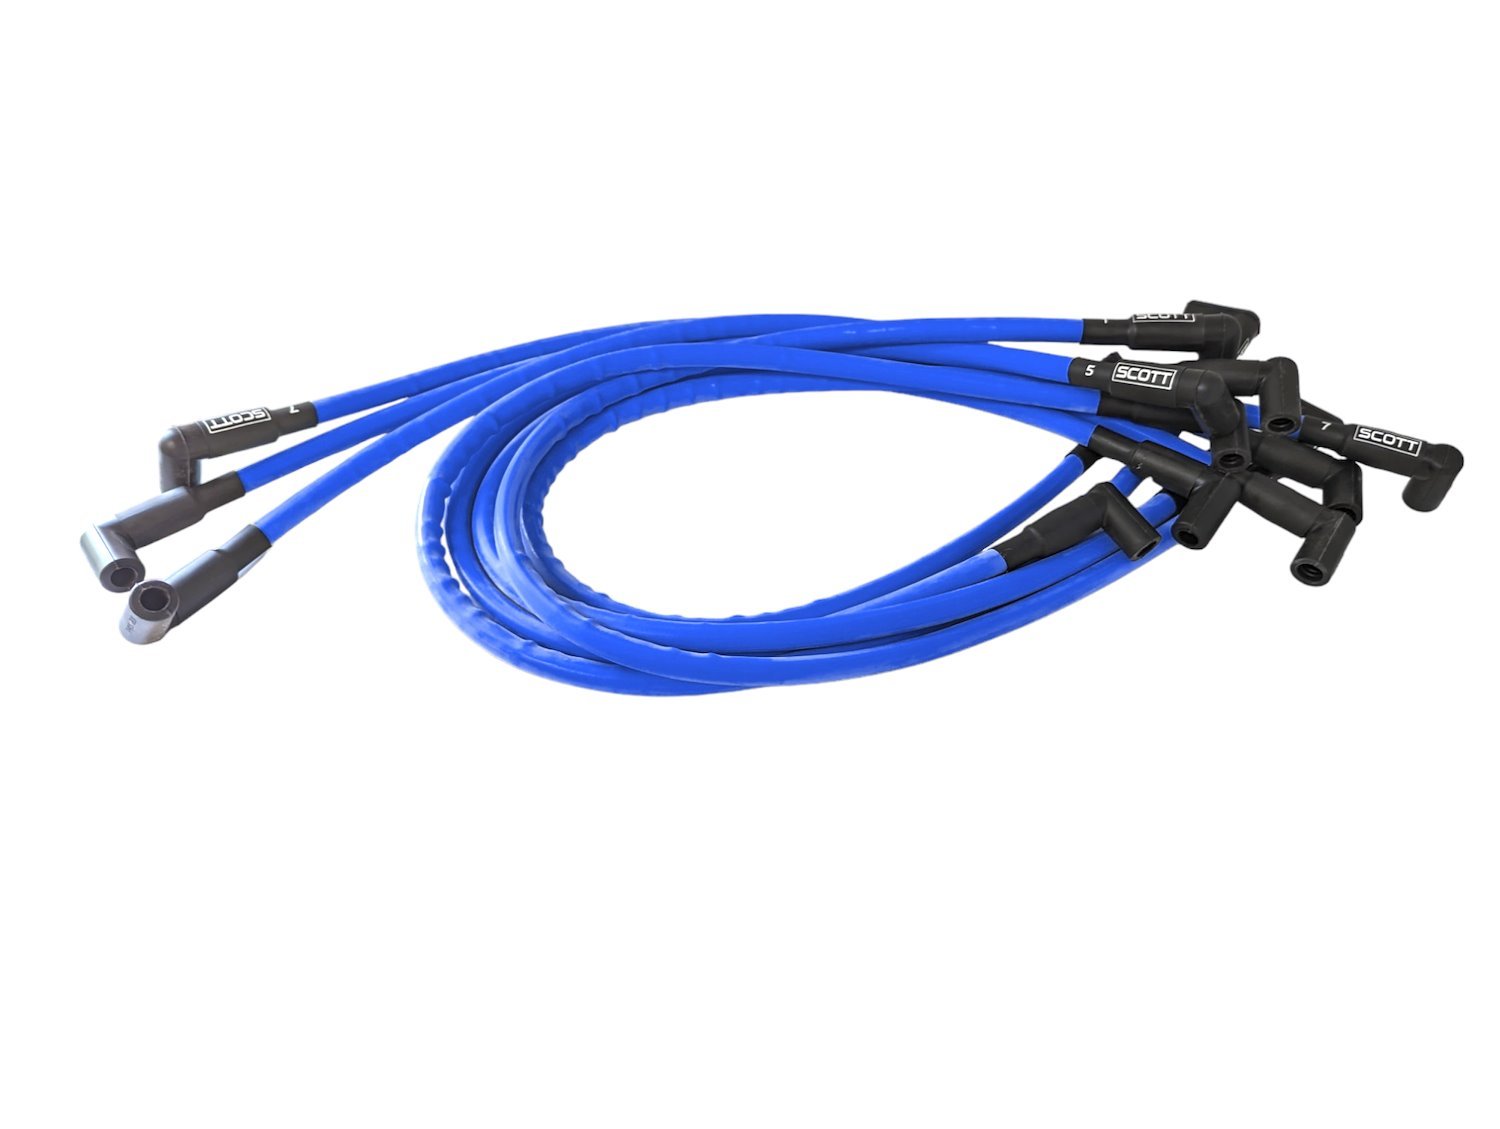 SPW-CH-604-4 High-Performance Silicone-Sleeved Spark Plug Wire Set for Small Block Chevy 604 Crate, Under Header [Blue]